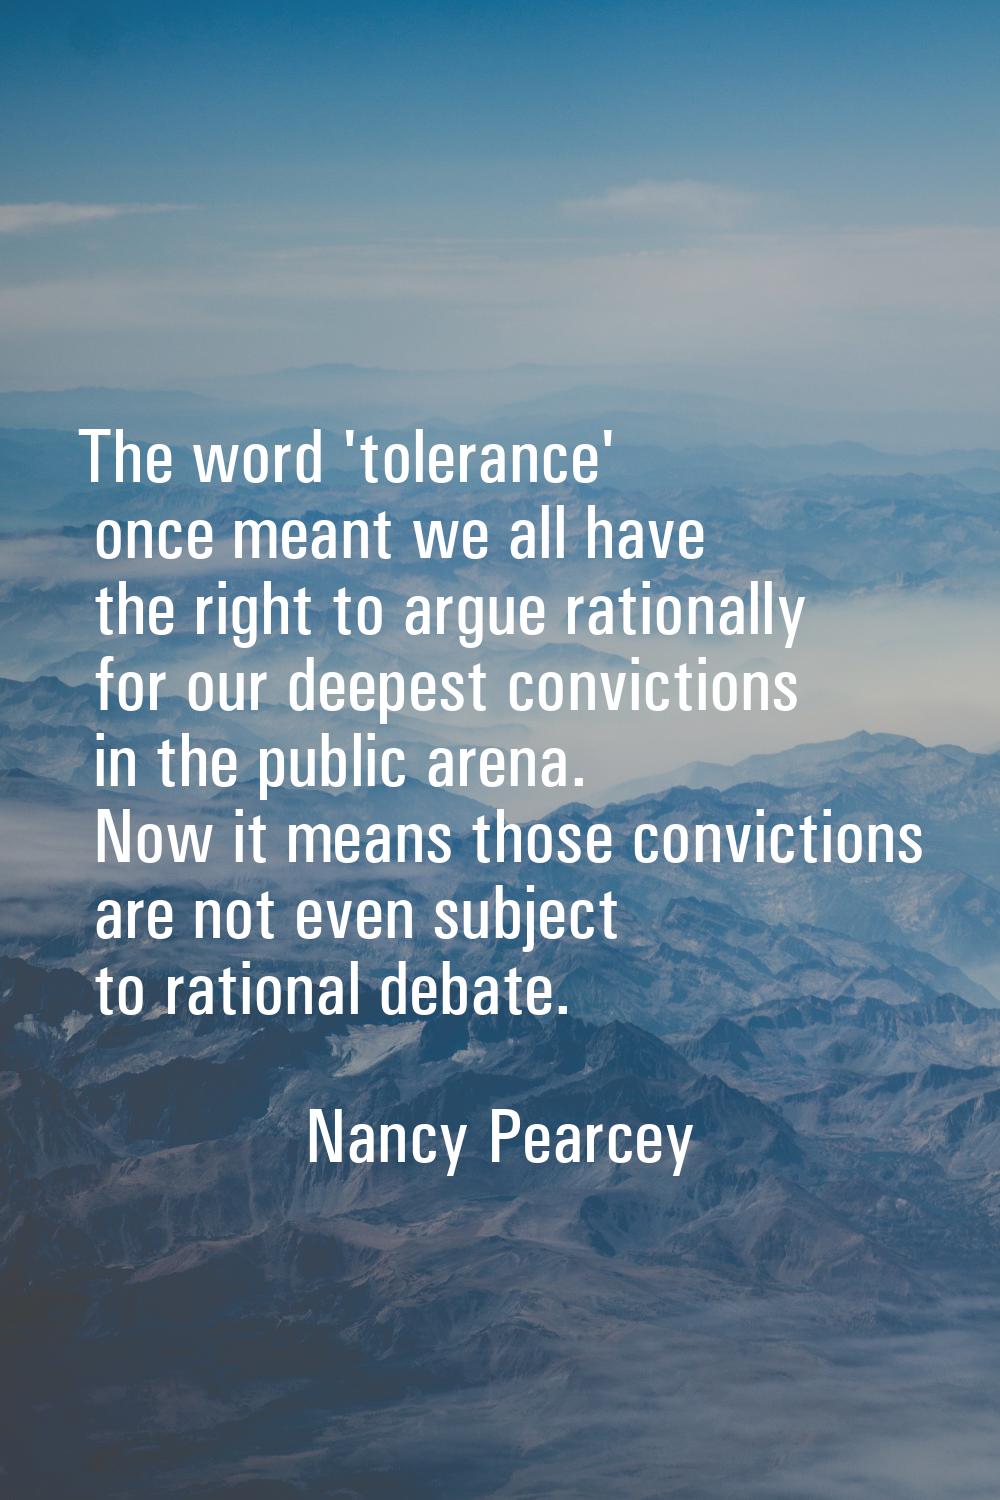 The word 'tolerance' once meant we all have the right to argue rationally for our deepest convictio